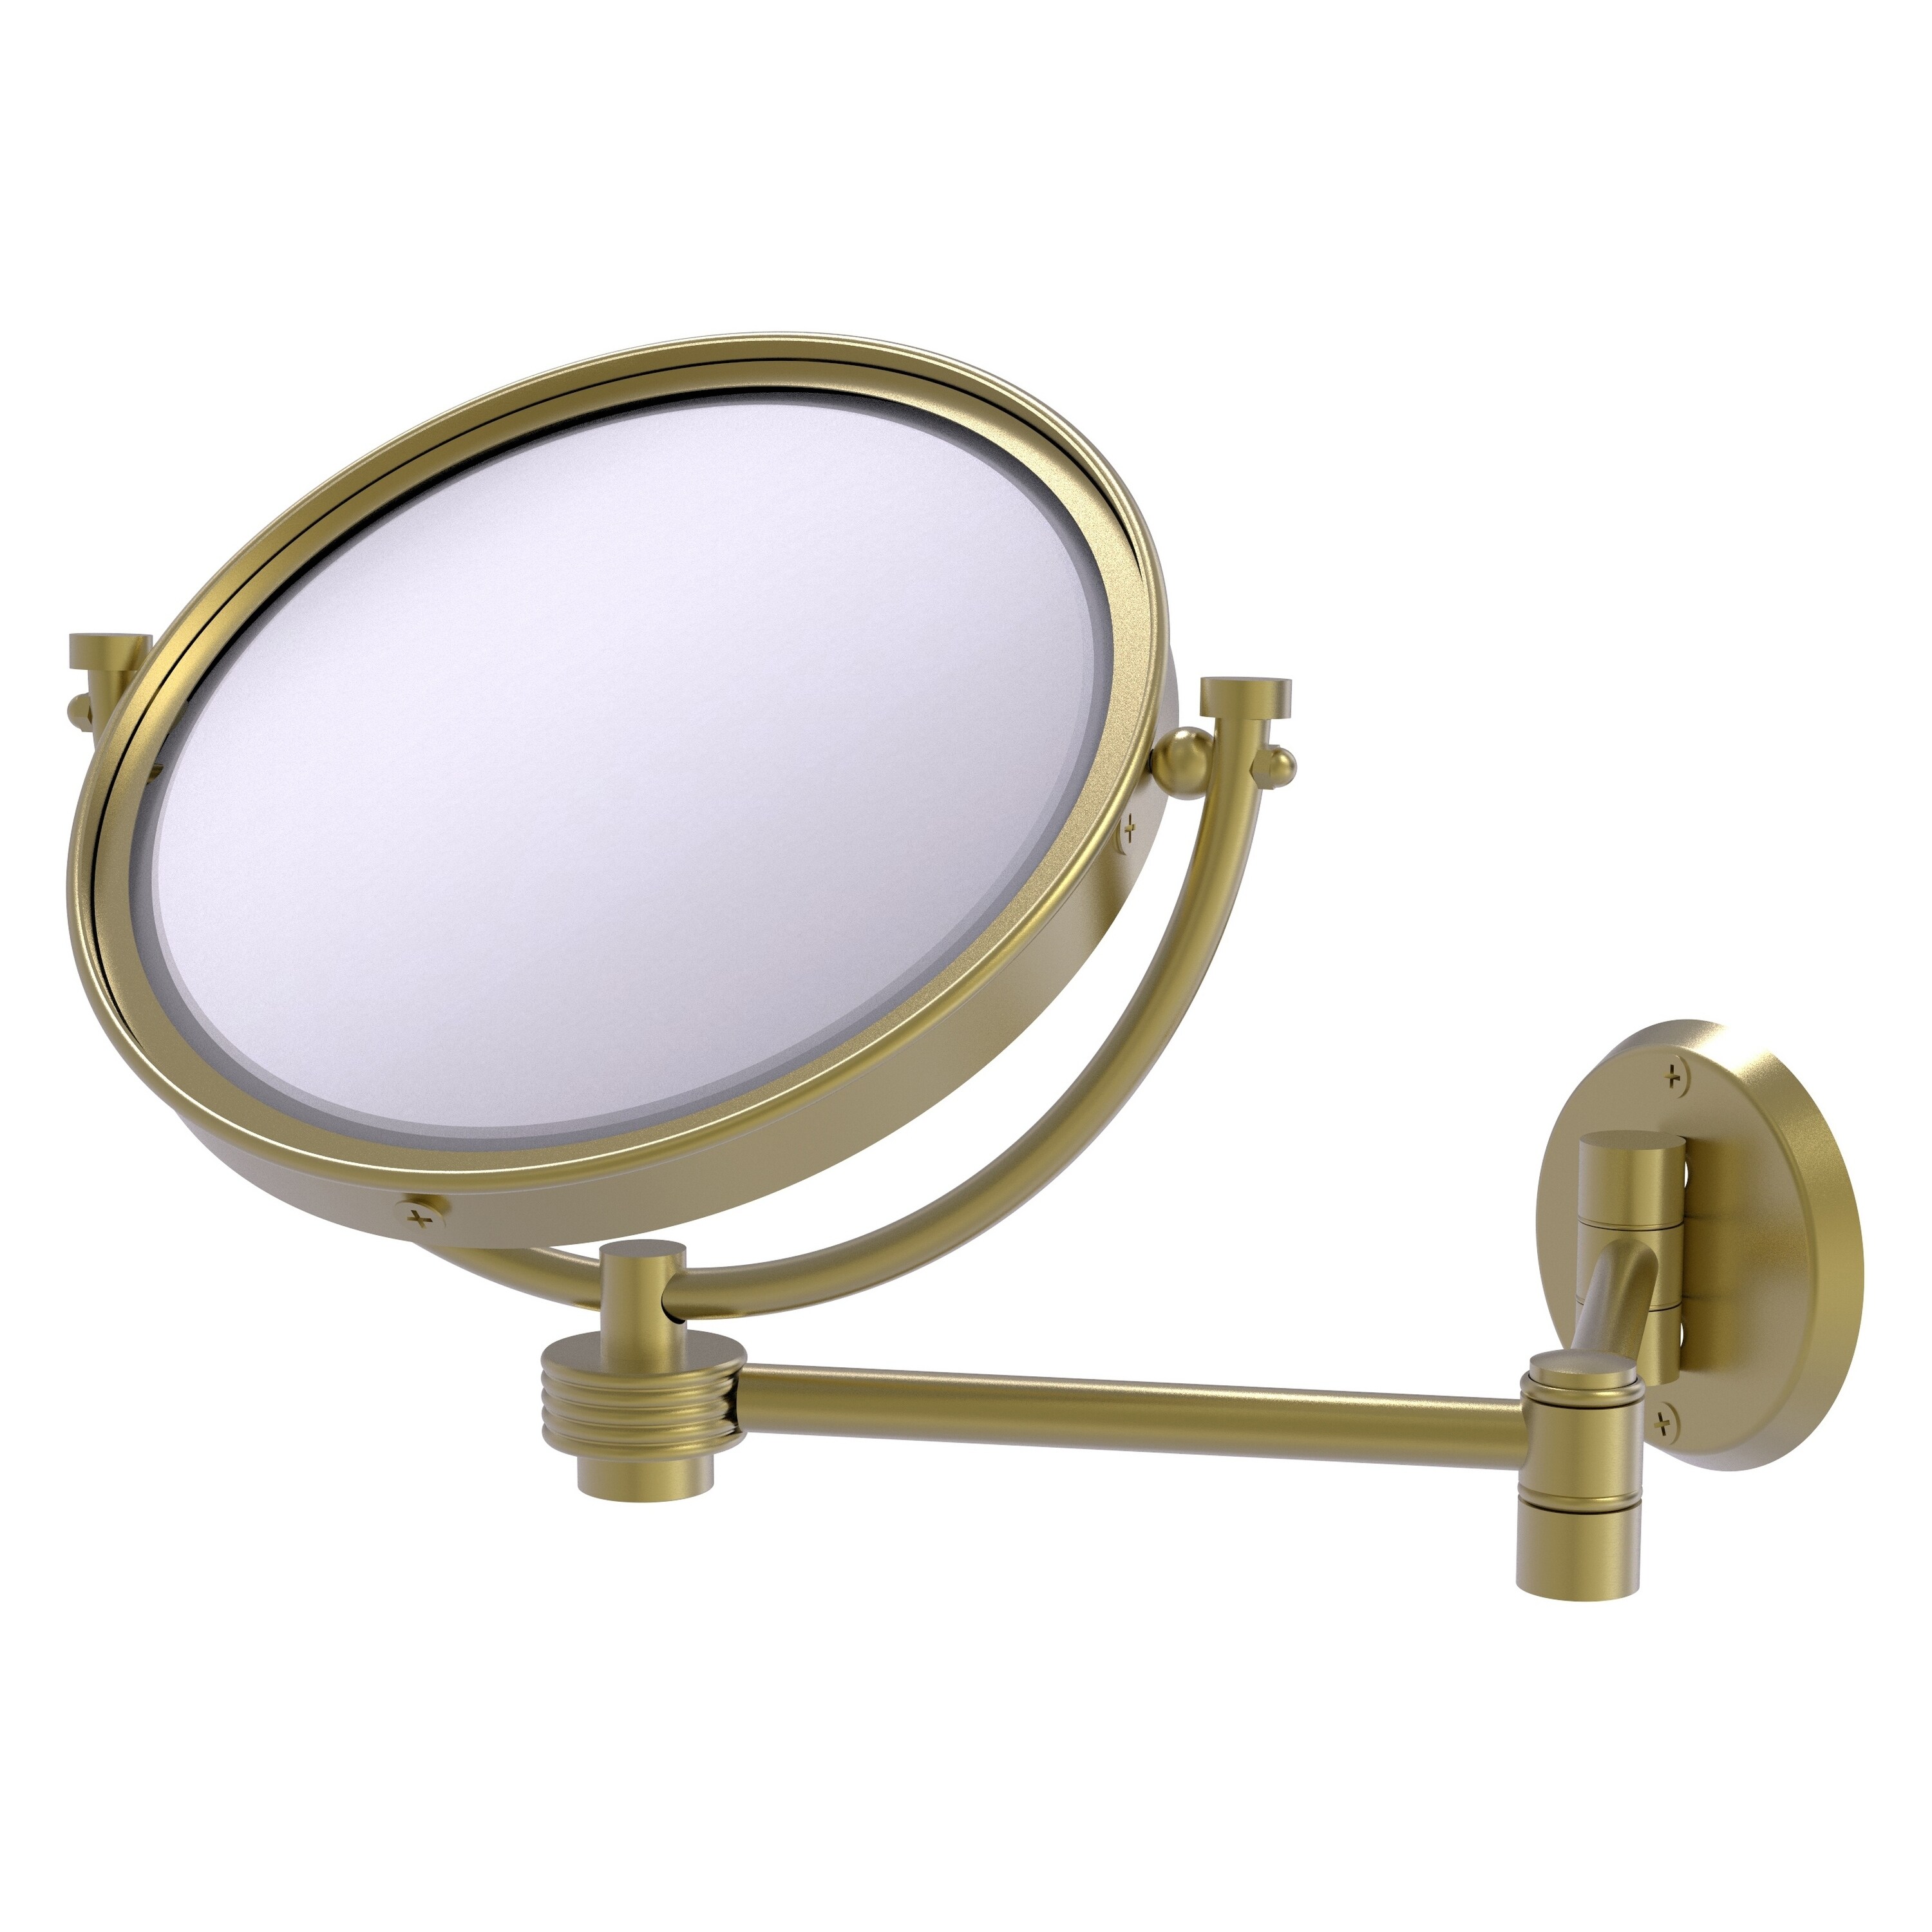 8-in x 10-in Satin Chrome Double-sided 3X Magnifying Wall-mounted Vanity Mirror | - Allied Brass WM-6G/3X-SBR